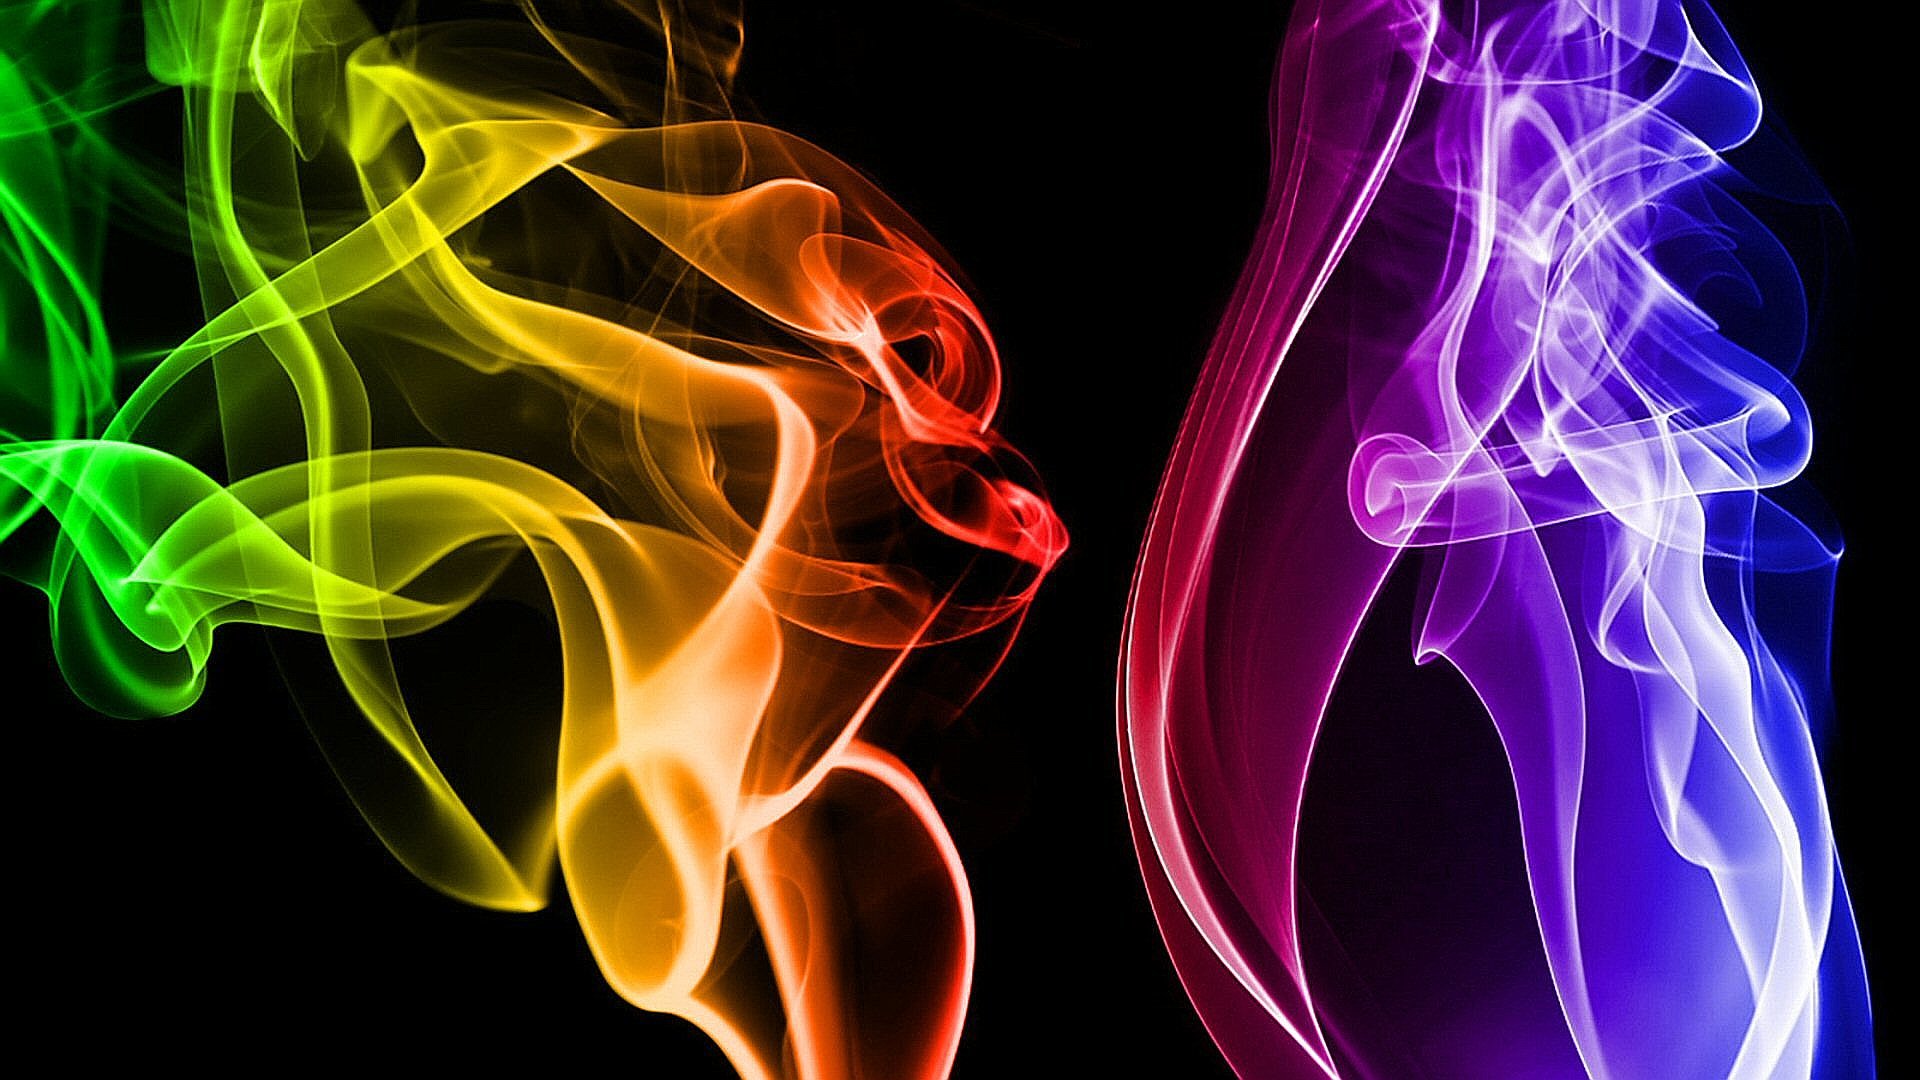 Awesome Smoke Free Wallpaper Id - Blue And Yellow Flames - HD Wallpaper 